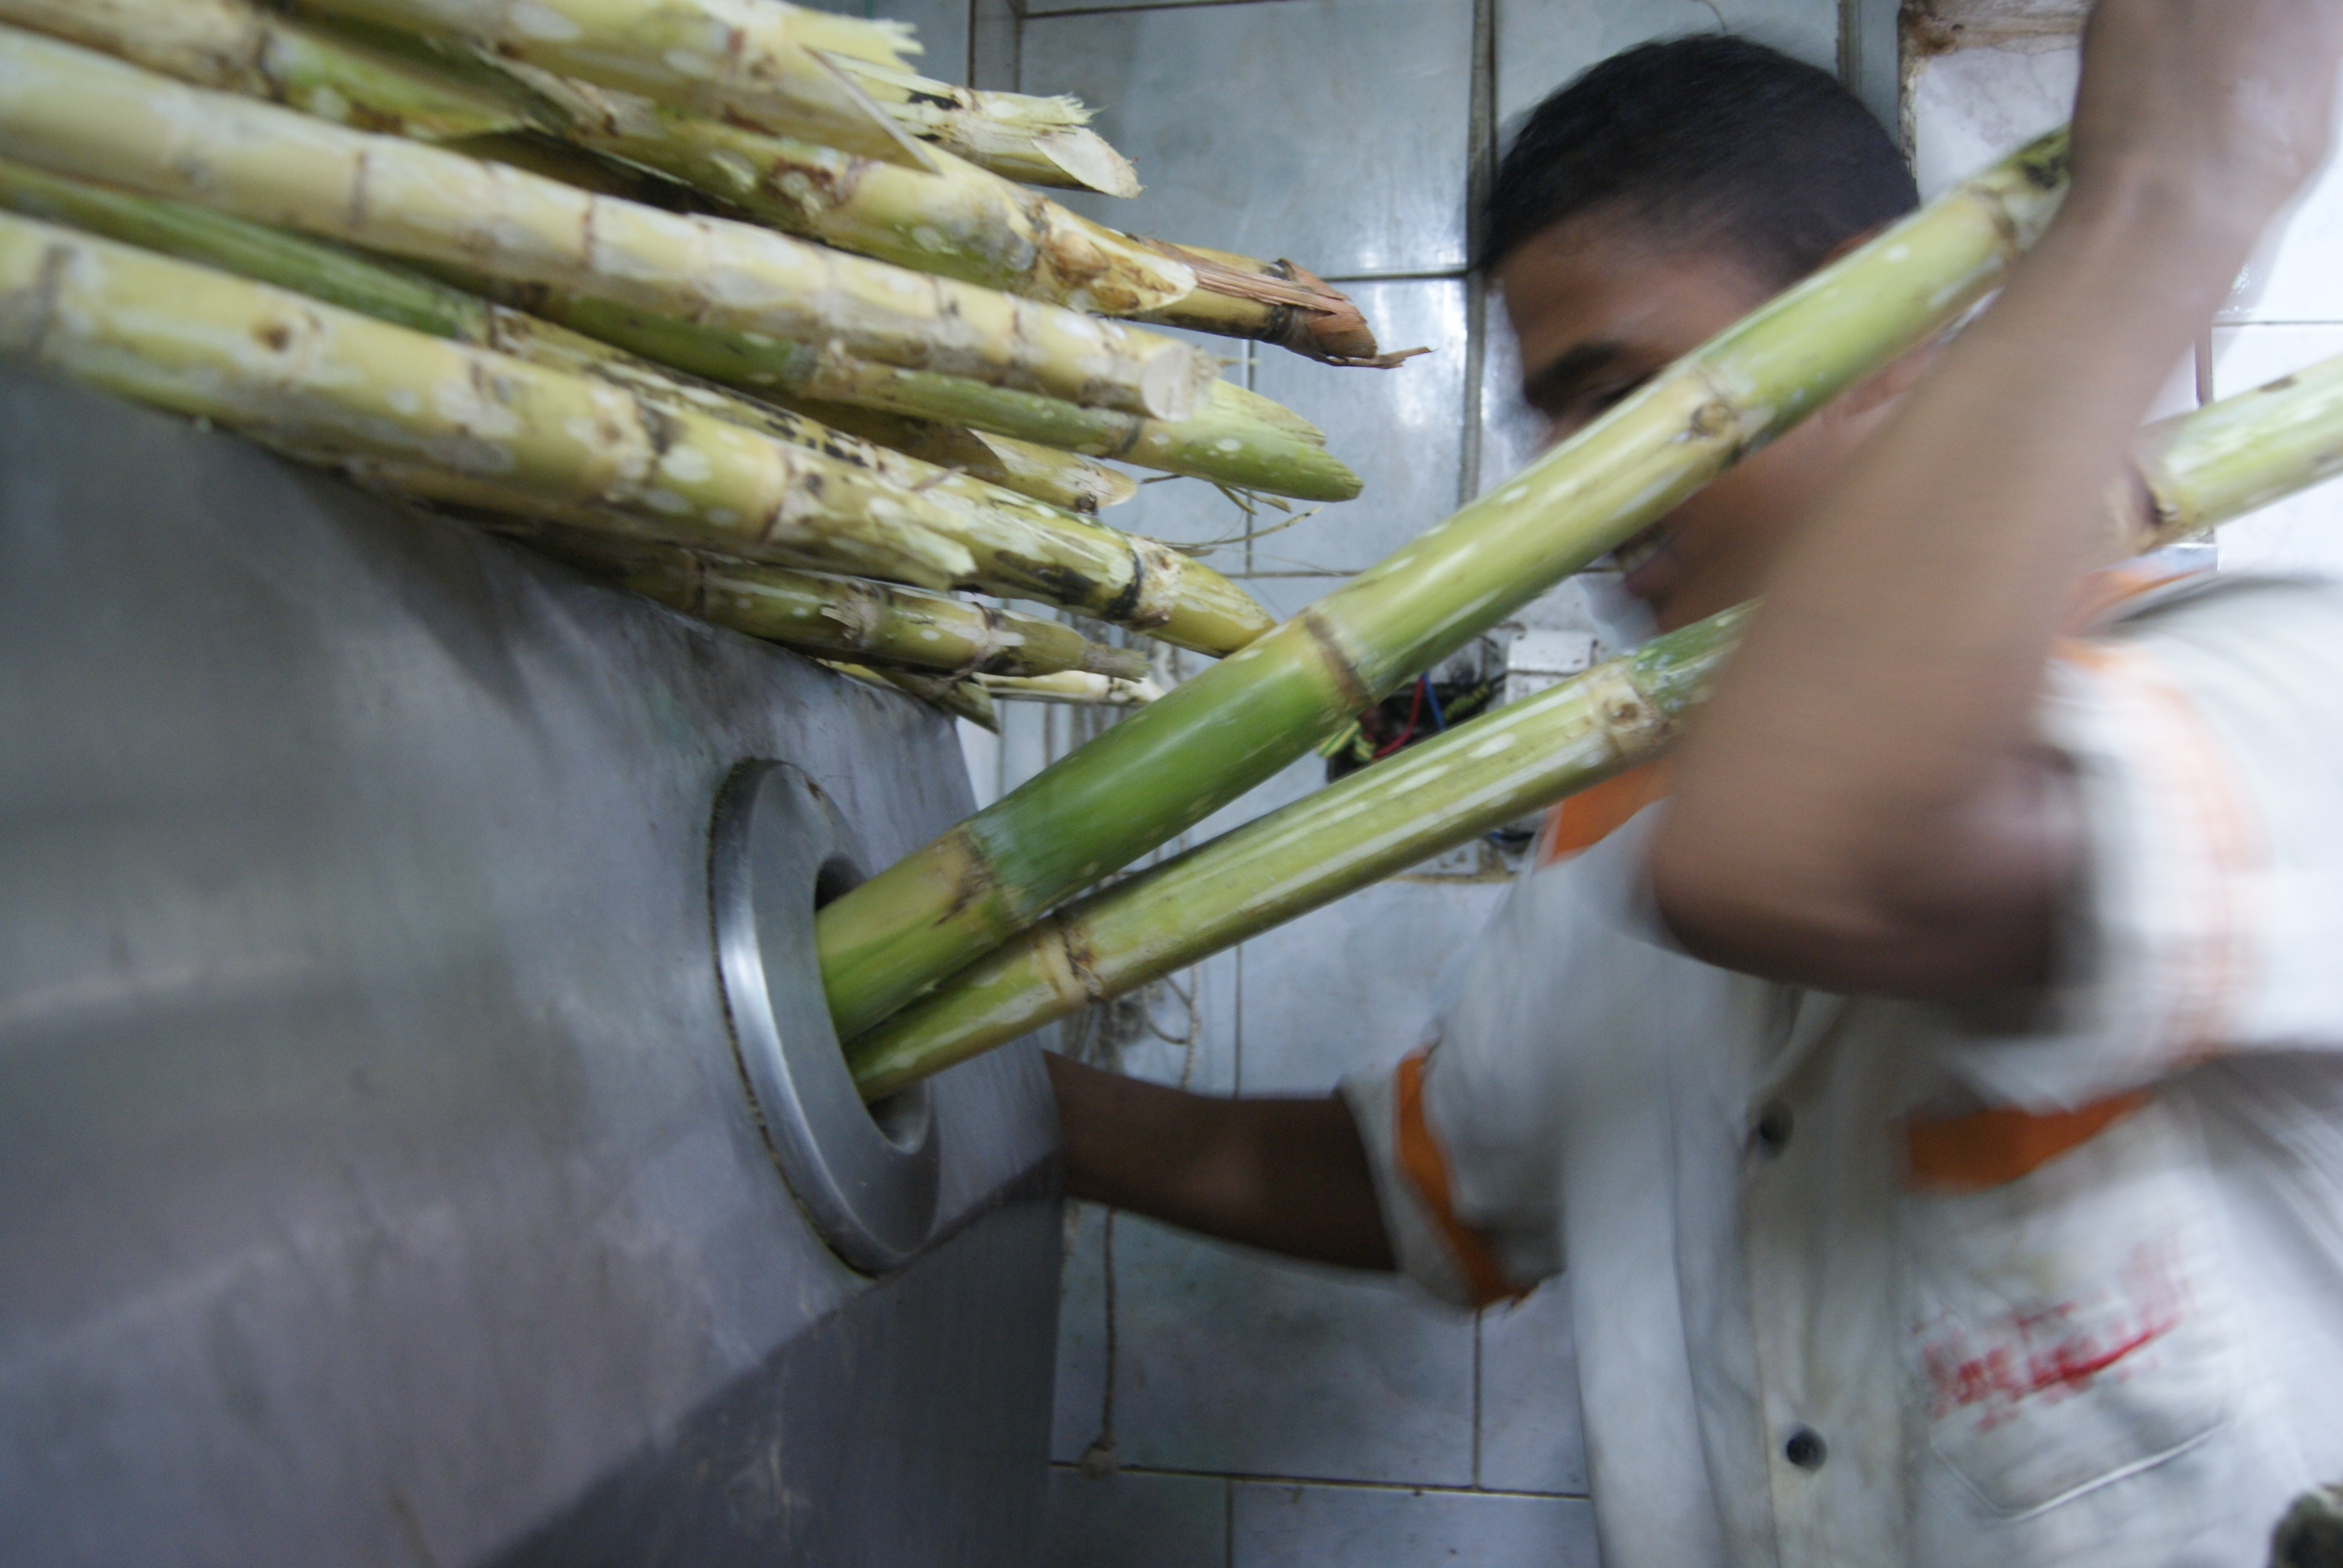 Sugar cane juice is extracted by introducing the sticks into the machine.